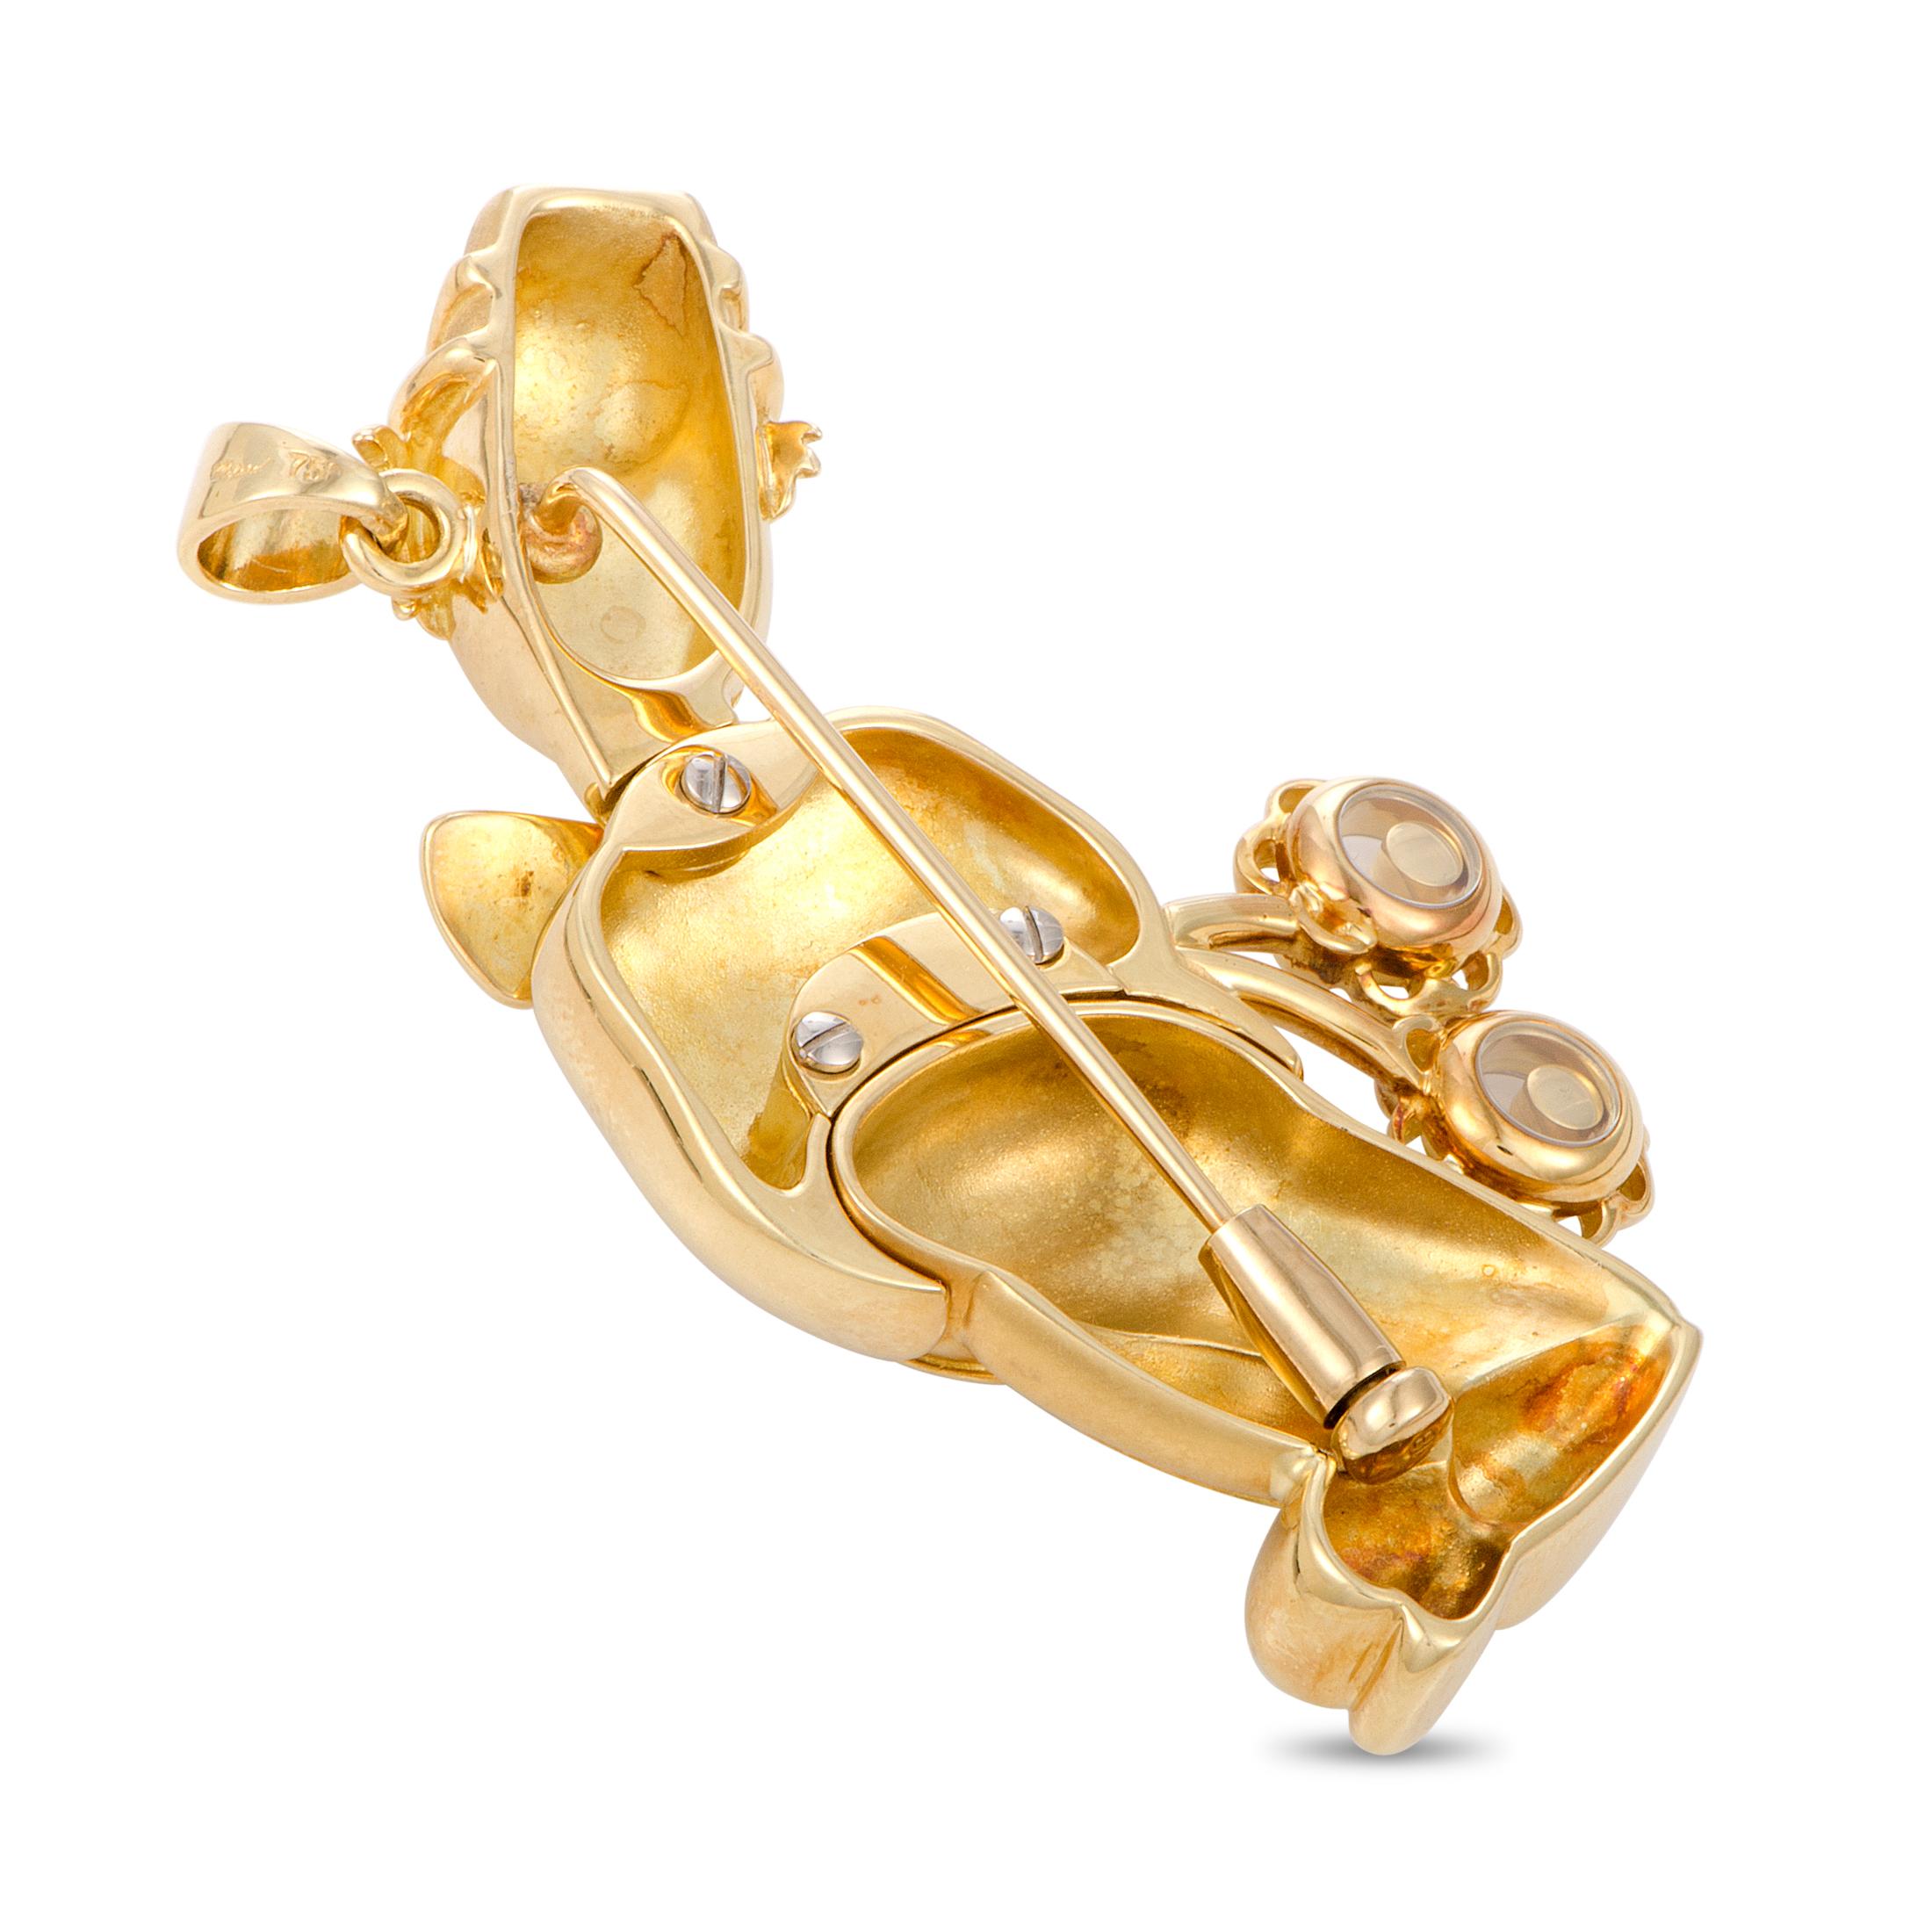 This vintage Chopard clown pendant that can also be worn as a brooch is made out of 18K yellow gold and multiple gemstones. The pendant weighs 40.7 grams, measuring 2.50” in length and 1.37” in width.
